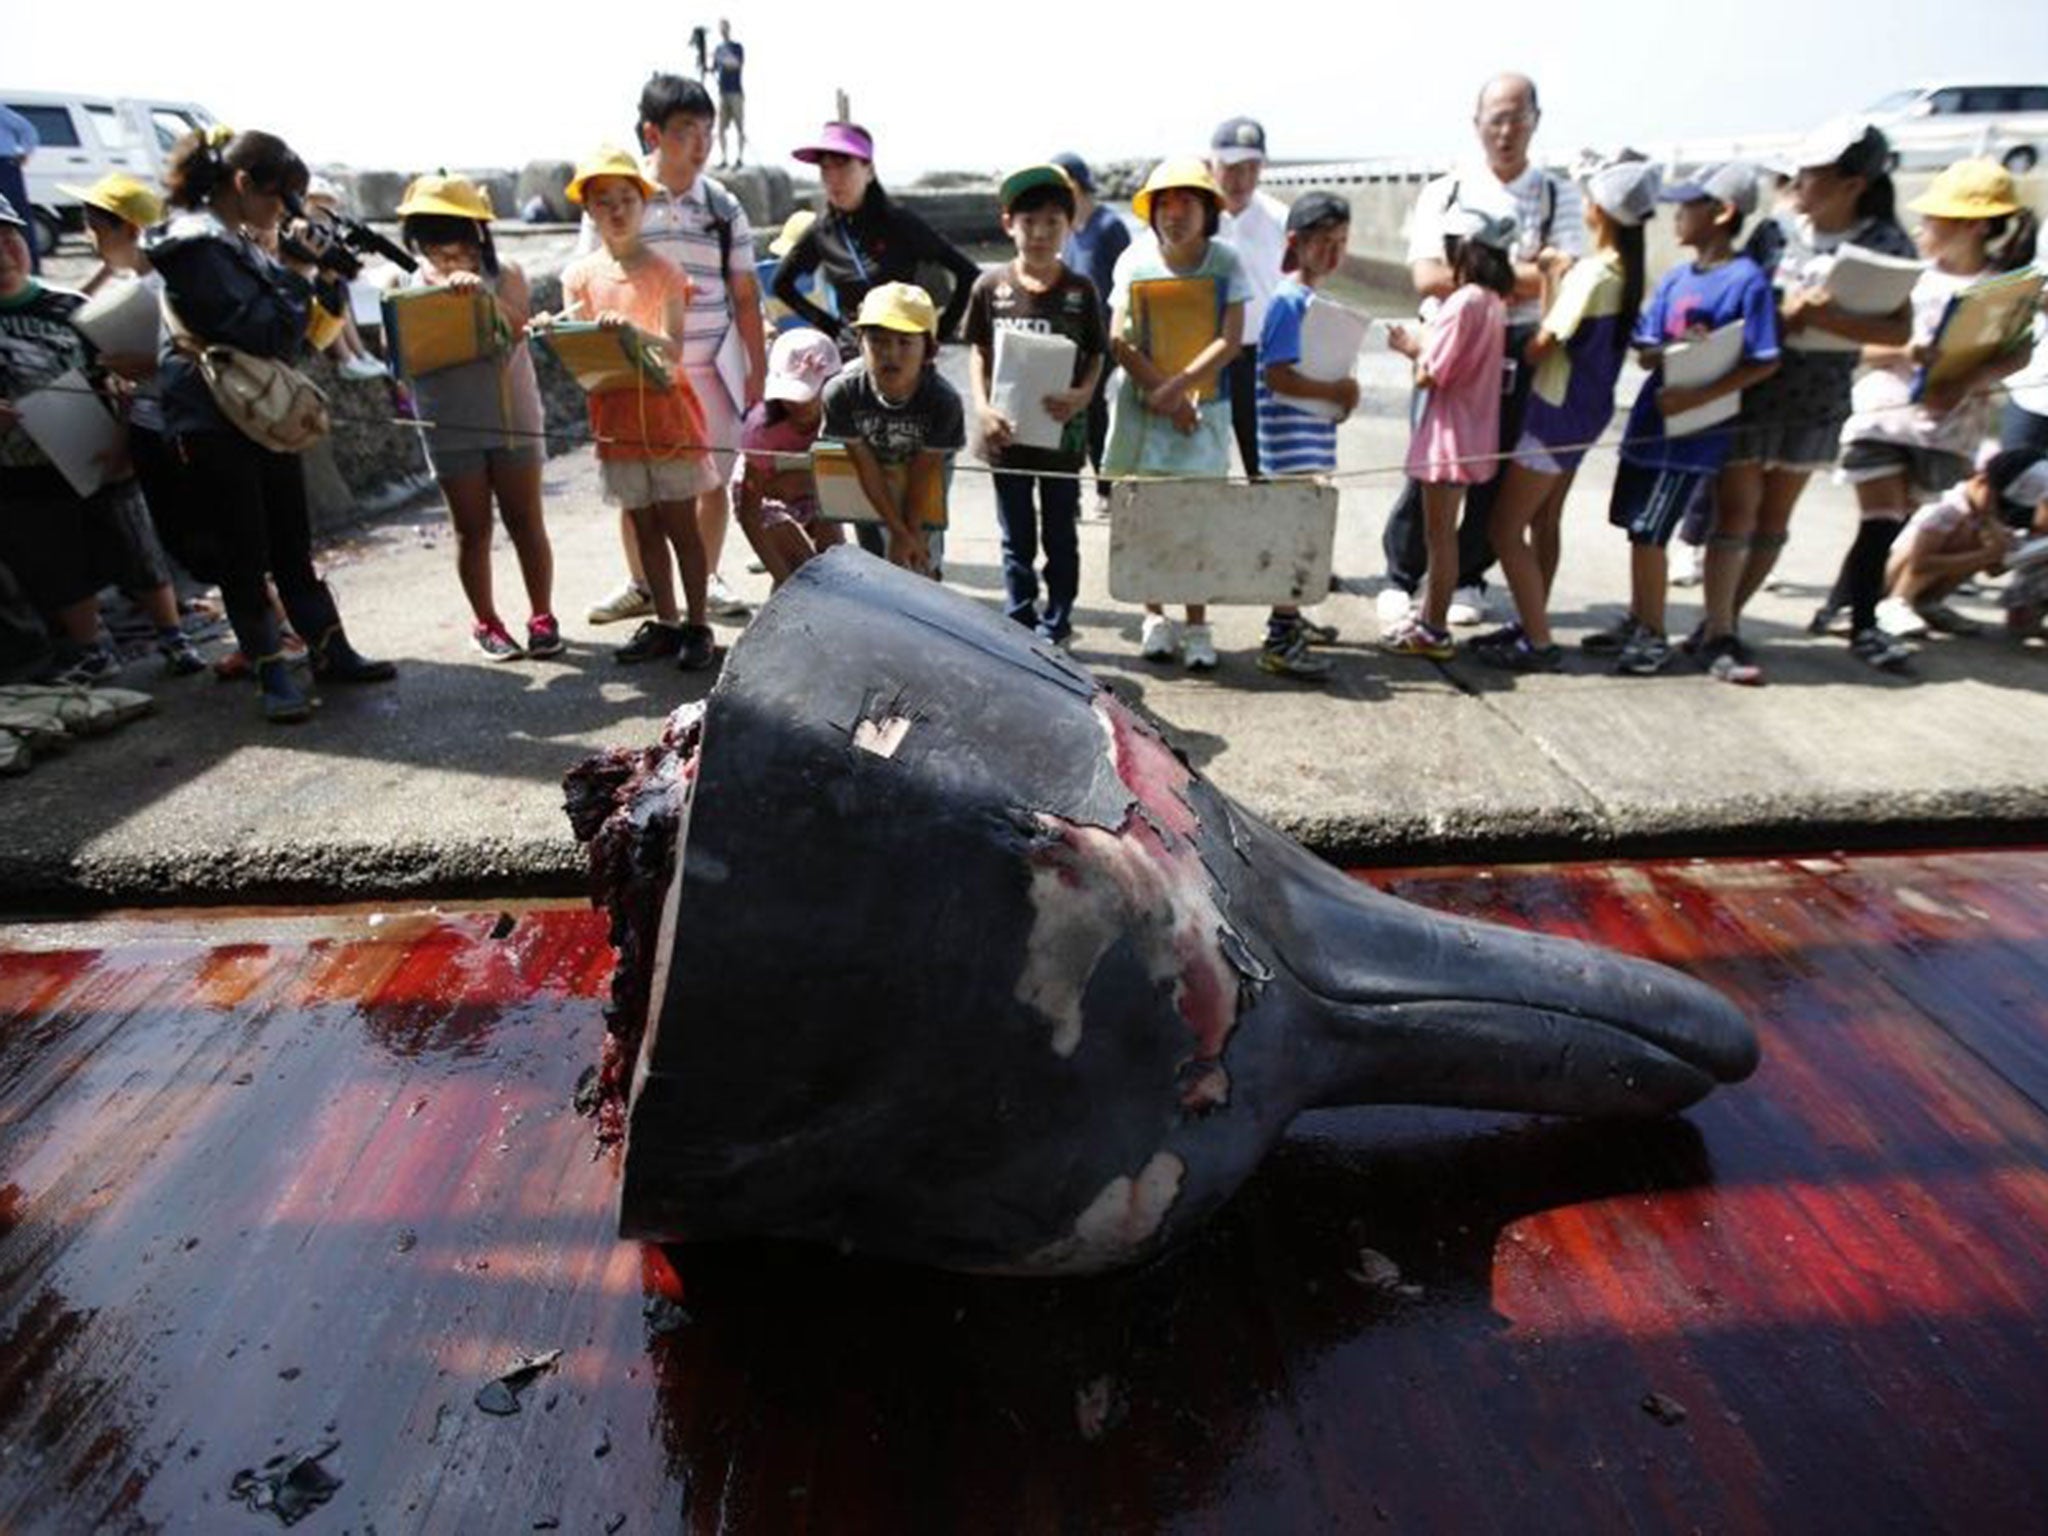 Children in the town of Minamiboso look at the severed head of a Baird’s beaked whale at an event yesterday celebrating the start of the whaling season